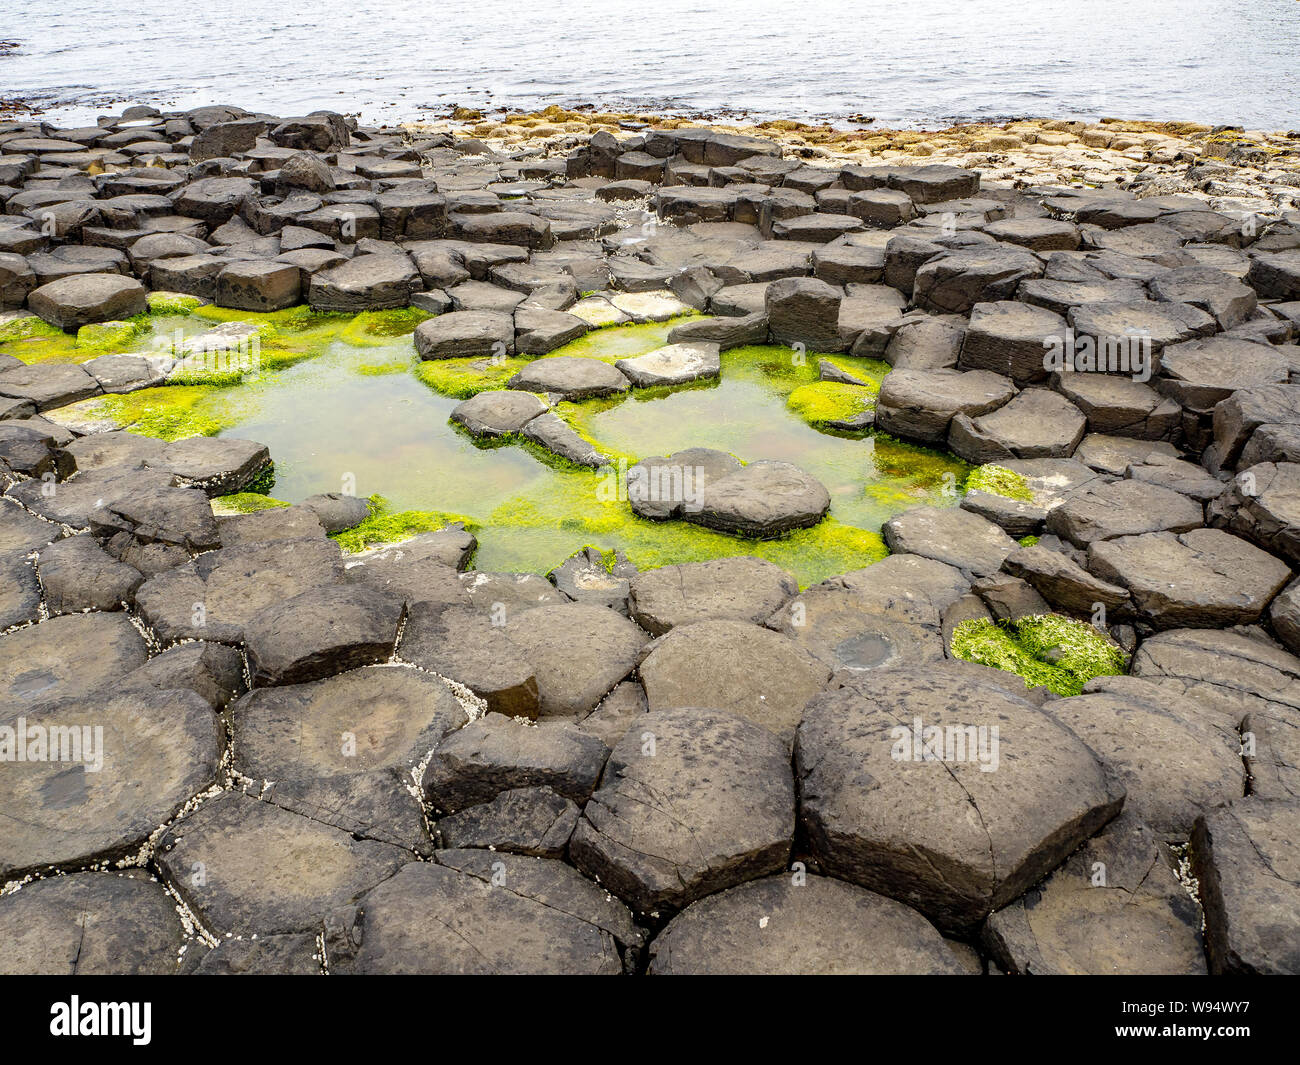 Giant’s Causeway, famous tourist attraction of Northern Ireland, UK. Unique hexagonal and pentagonal geological formations of volcanic basalt rocks. Stock Photo